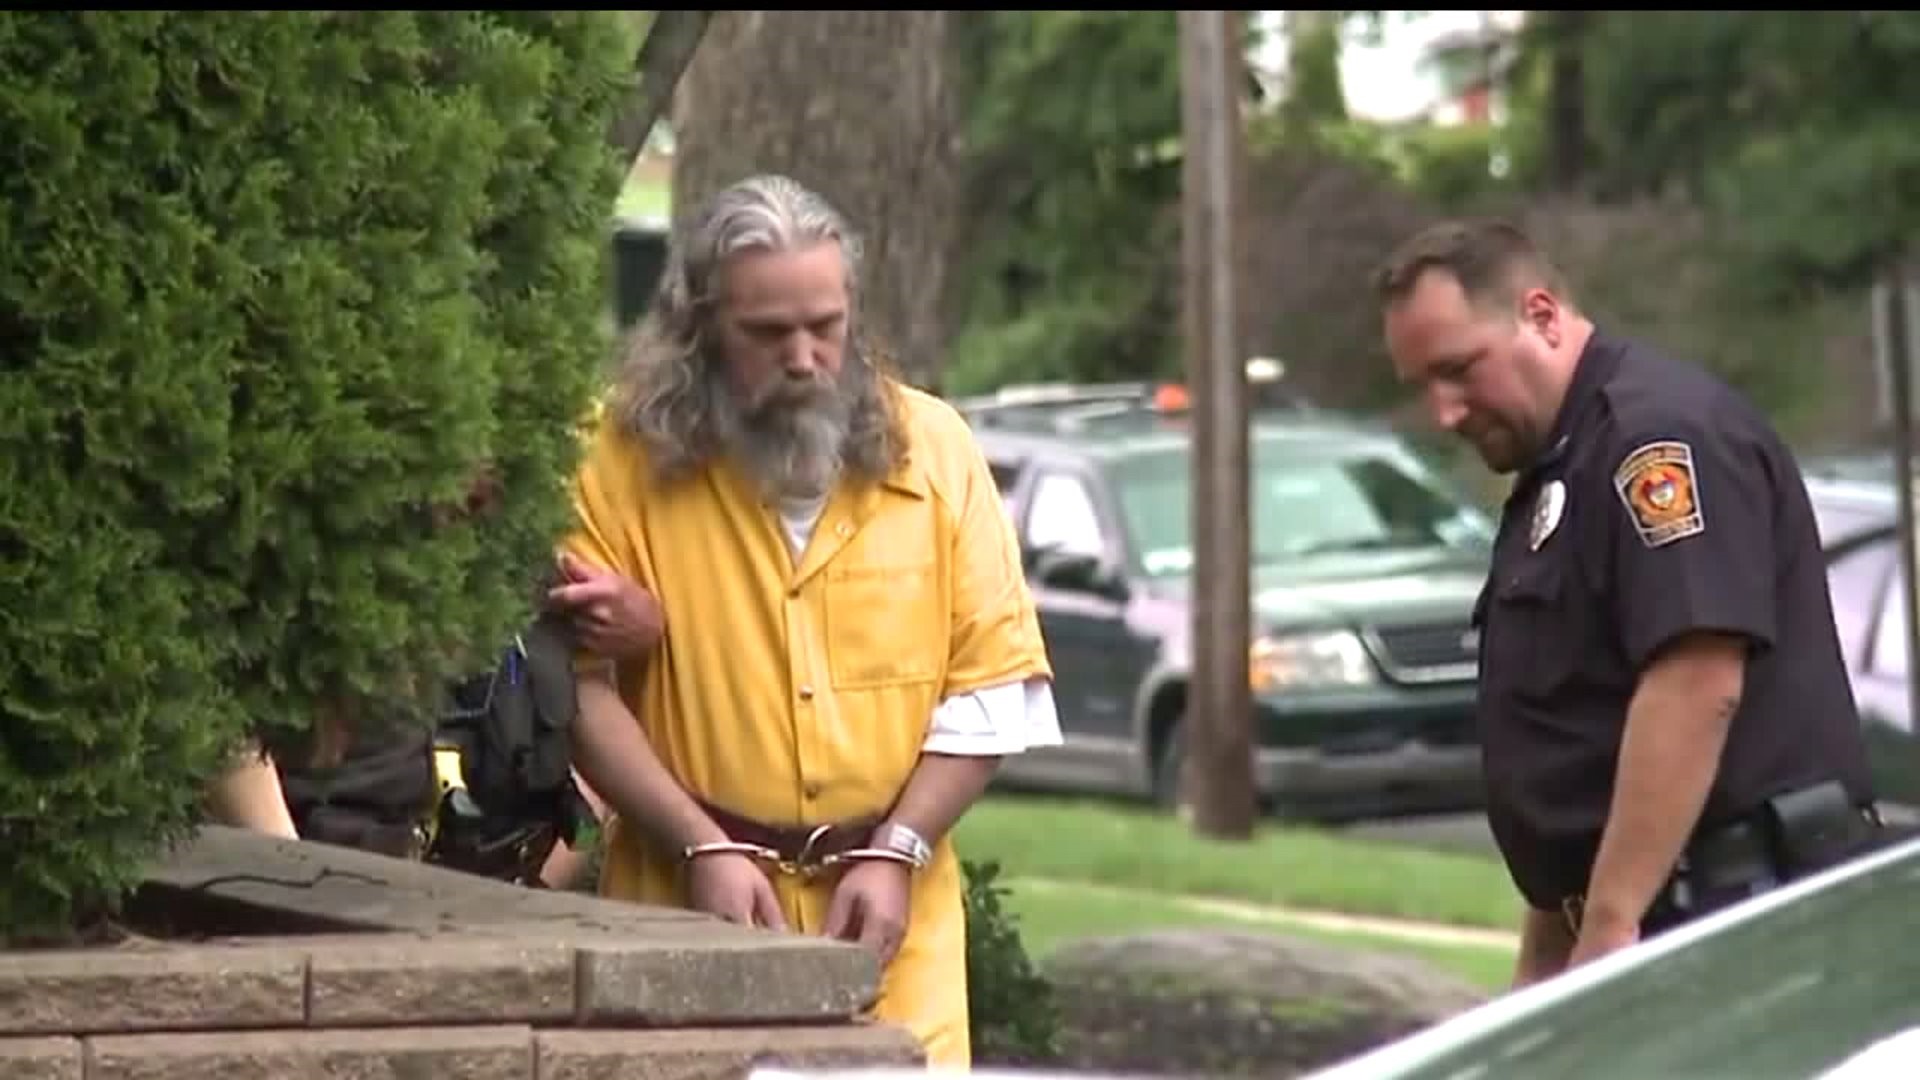 Jury selection in the child sex assault trial of Lee Kaplan is slated to begin today